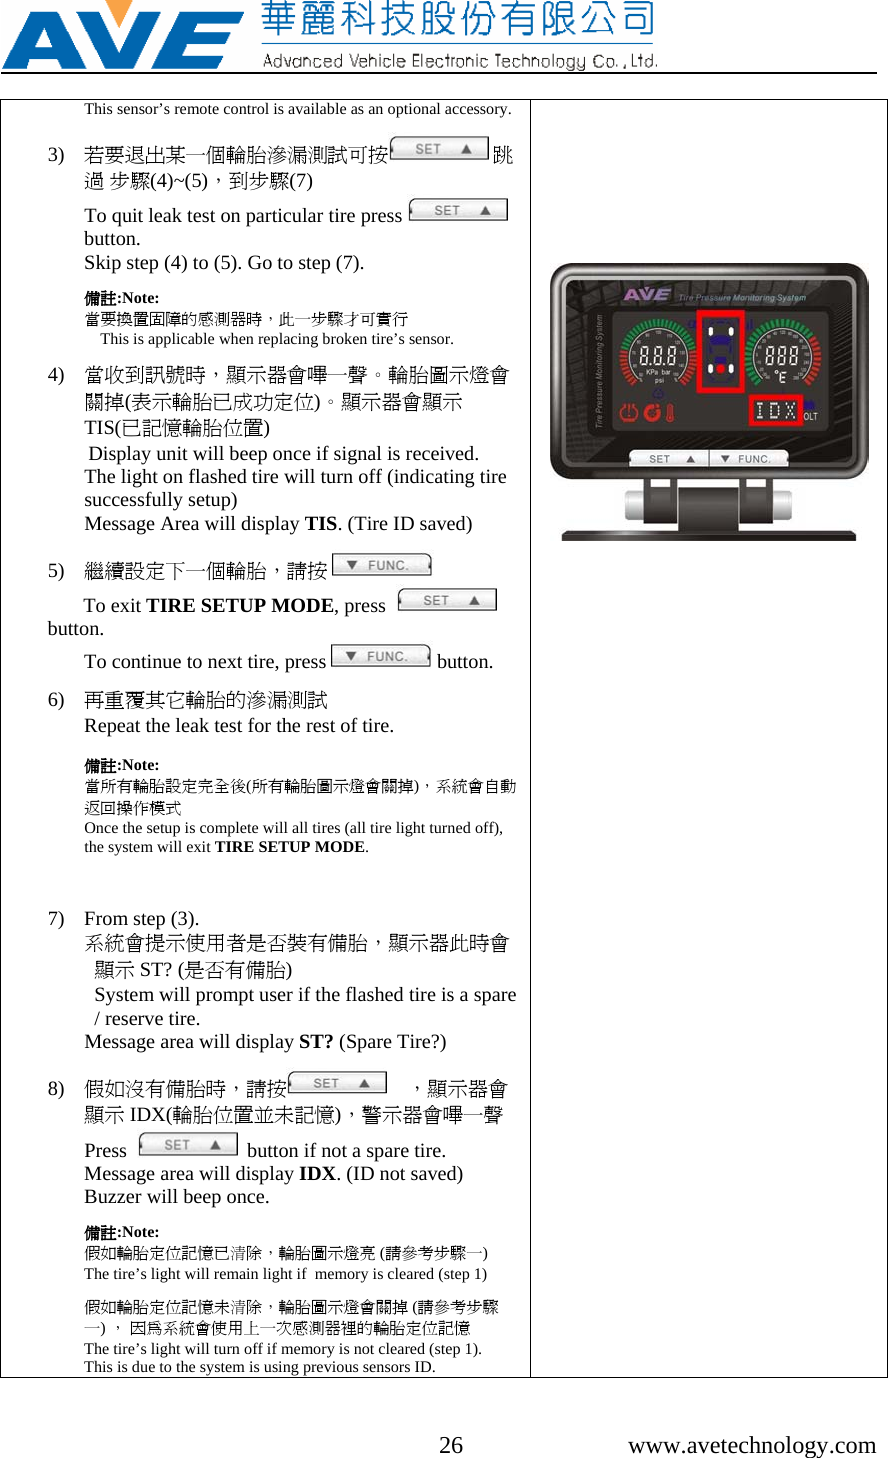     26 www.avetechnology.com This sensor’s remote control is available as an optional accessory.  3) 若要退出某一個輪胎滲漏測試可按  跳過 步驟(4)~(5)，到步驟(7)                                           To quit leak test on particular tire press   button.  Skip step (4) to (5). Go to step (7).  備註:Note: 當要換置固障的感測器時，此一步驟才可實行                        This is applicable when replacing broken tire’s sensor.  4) 當收到訊號時，顯示器會嗶一聲。輪胎圖示燈會關掉(表示輪胎已成功定位)。顯示器會顯示TIS(已記憶輪胎位置) Display unit will beep once if signal is received. The light on flashed tire will turn off (indicating tire successfully setup) Message Area will display TIS. (Tire ID saved)   5) 繼續設定下一個輪胎，請按        To exit TIRE SETUP MODE, press    button. To continue to next tire, press   button.  6) 再重覆其它輪胎的滲漏測試                                Repeat the leak test for the rest of tire.  備註:Note:  當所有輪胎設定完全後(所有輪胎圖示燈會關掉)，系統會自動返回操作模式                                                                                Once the setup is complete will all tires (all tire light turned off), the system will exit TIRE SETUP MODE.     7) From step (3).  系統會提示使用者是否裝有備胎，顯示器此時會顯示 ST? (是否有備胎)                                          System will prompt user if the flashed tire is a spare / reserve tire. Message area will display ST? (Spare Tire?)  8) 假如沒有備胎時，請按     ，顯示器會顯示 IDX(輪胎位置並未記憶)，警示器會嗶一聲      Press     button if not a spare tire. Message area will display IDX. (ID not saved) Buzzer will beep once.  備註:Note: 假如輪胎定位記憶已清除，輪胎圖示燈亮 (請參考步驟一)           The tire’s light will remain light if  memory is cleared (step 1)  假如輪胎定位記憶未清除，輪胎圖示燈會關掉 (請參考步驟一) ， 因為系統會使用上一次感測器裡的輪胎定位記憶               The tire’s light will turn off if memory is not cleared (step 1). This is due to the system is using previous sensors ID.            